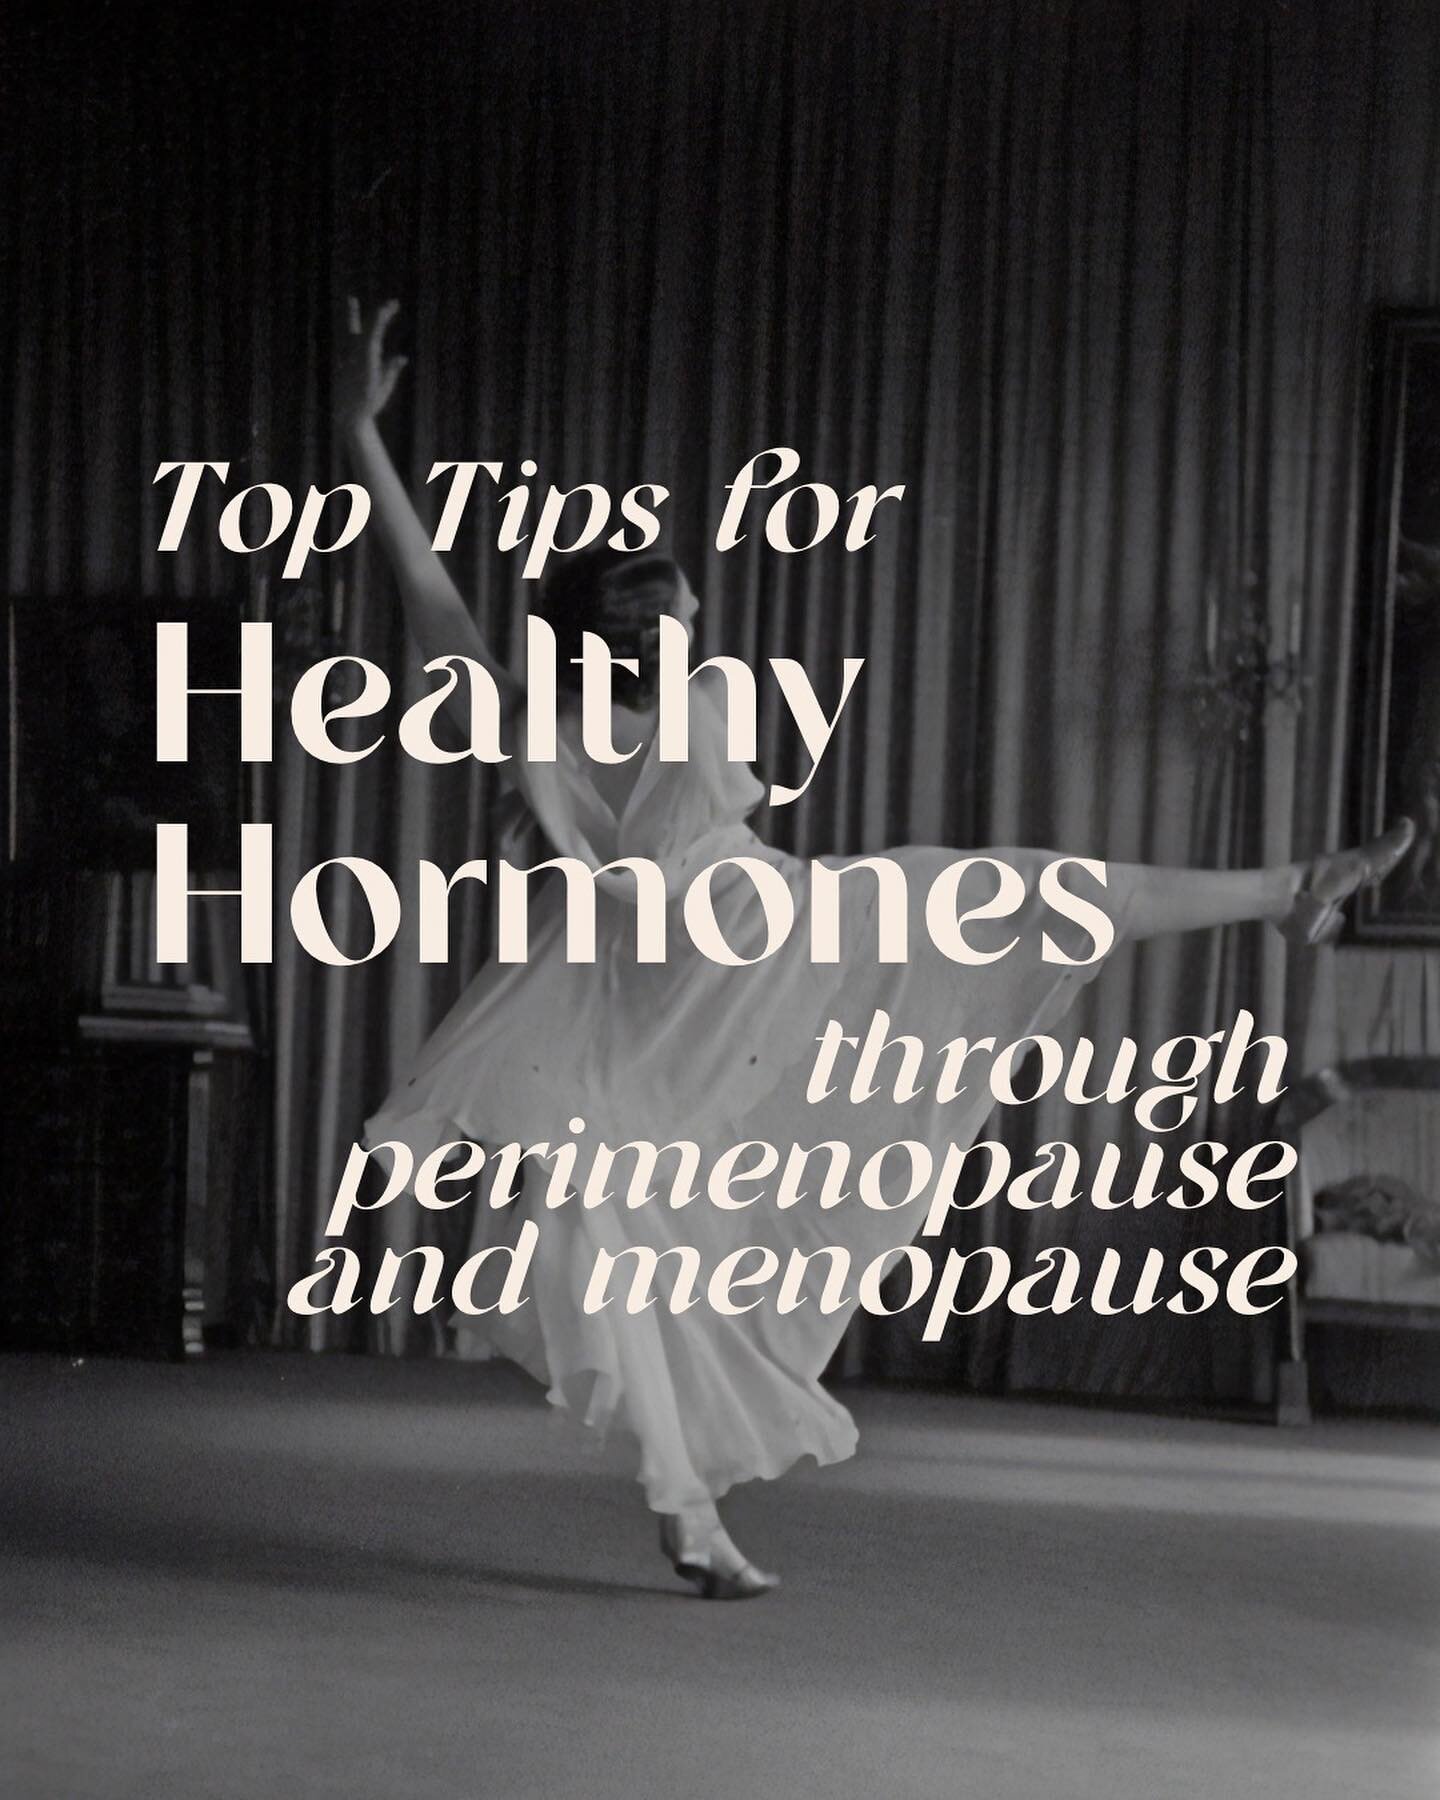 A woman&rsquo;s body is a work of art. 

As we journey through our cycles and life stages, we&rsquo;re given opportunities to tune into the wisdom of our hormones. 

Leaning on principles from Yoga Therapy and Naturopathic medicine, we can nurture ou